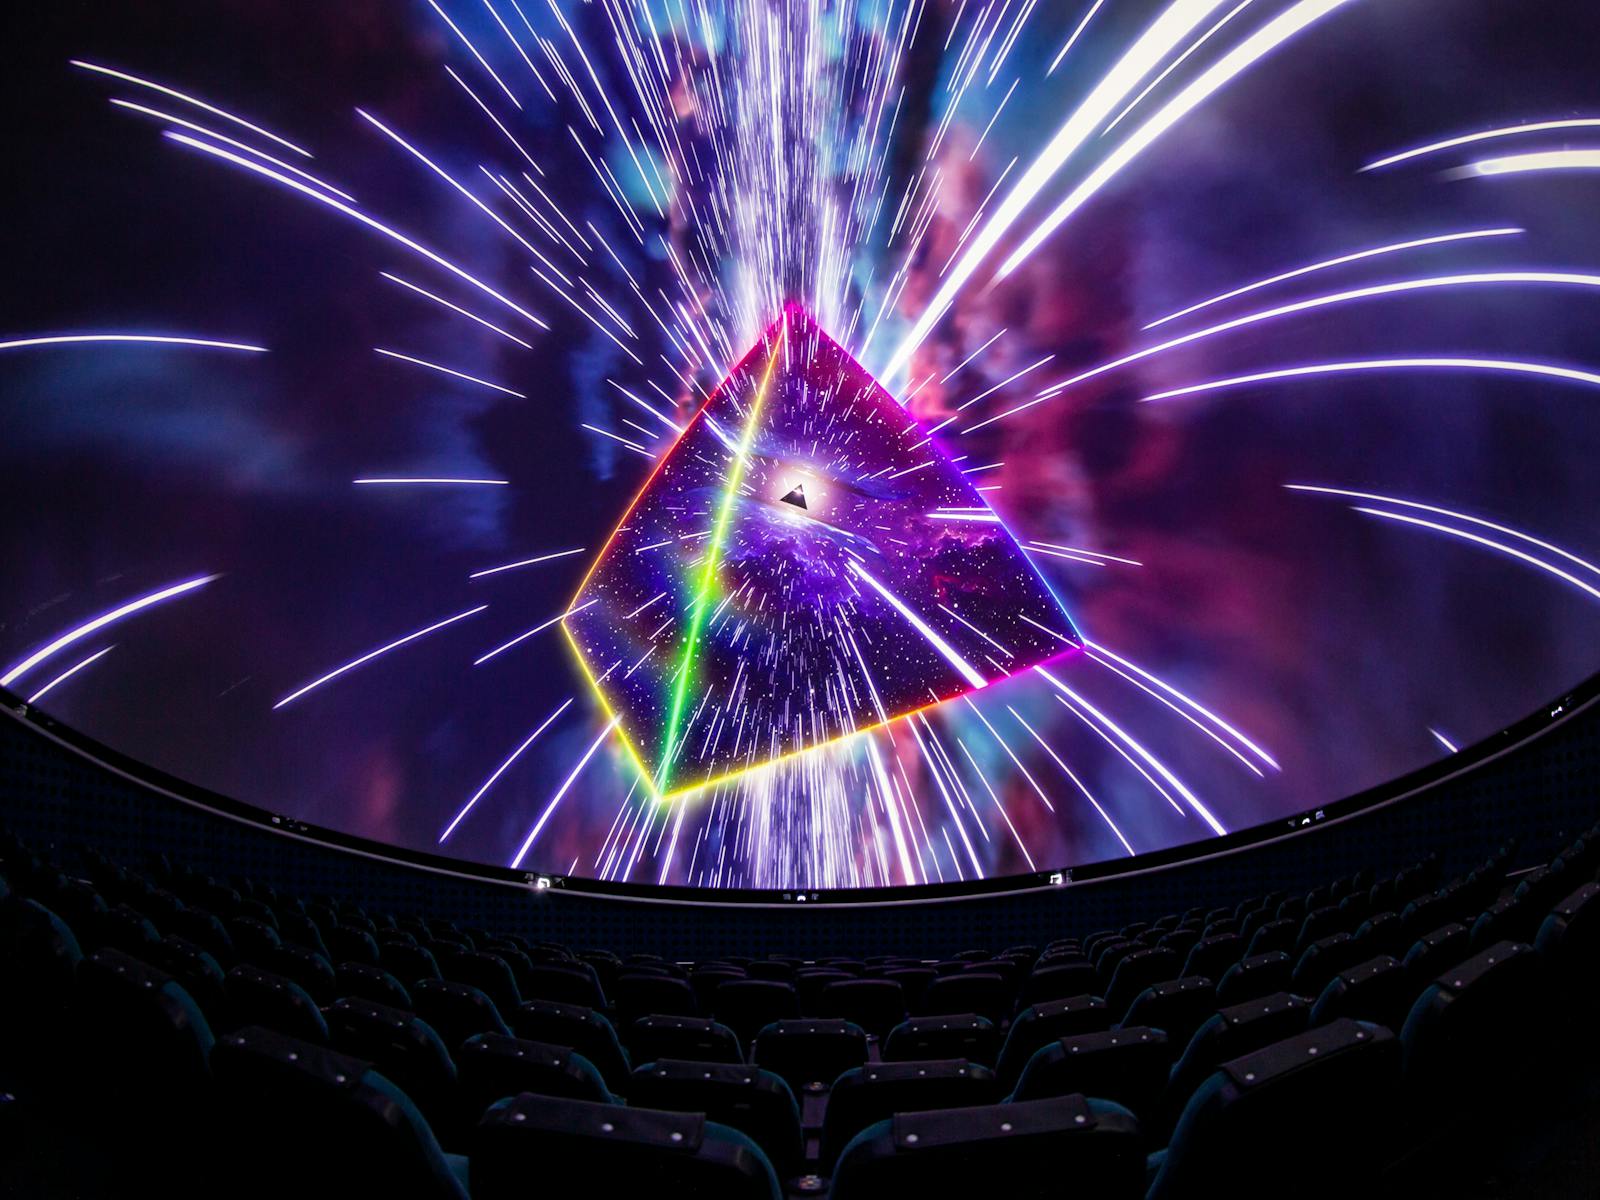 Image from the Dark Side of the Moon planetarium show, depicting a prism and neon lights.